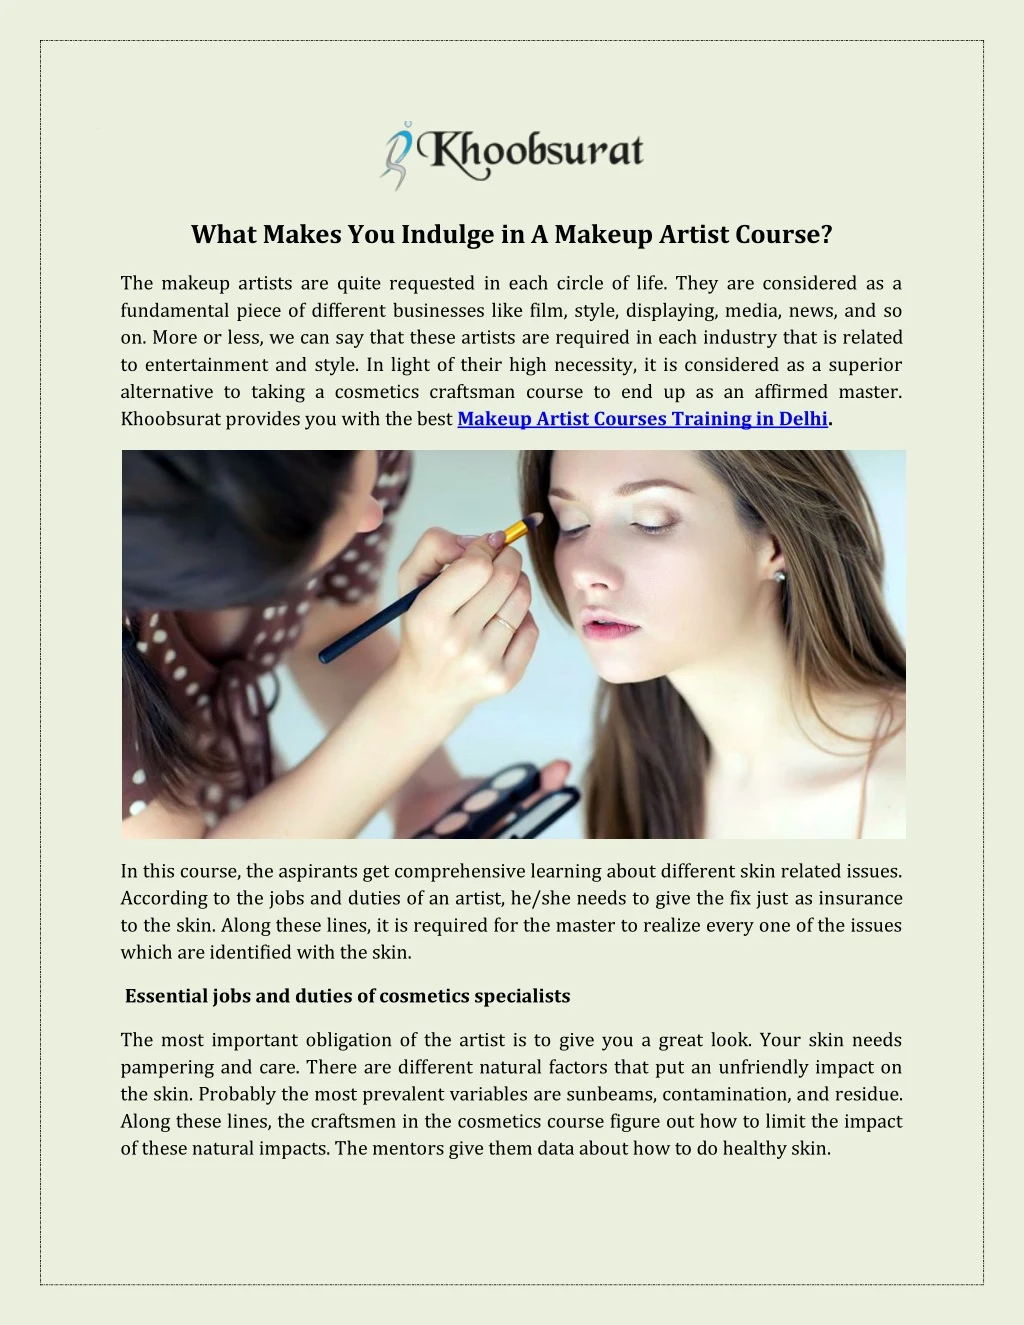 what makes you indulge in a makeup artist course